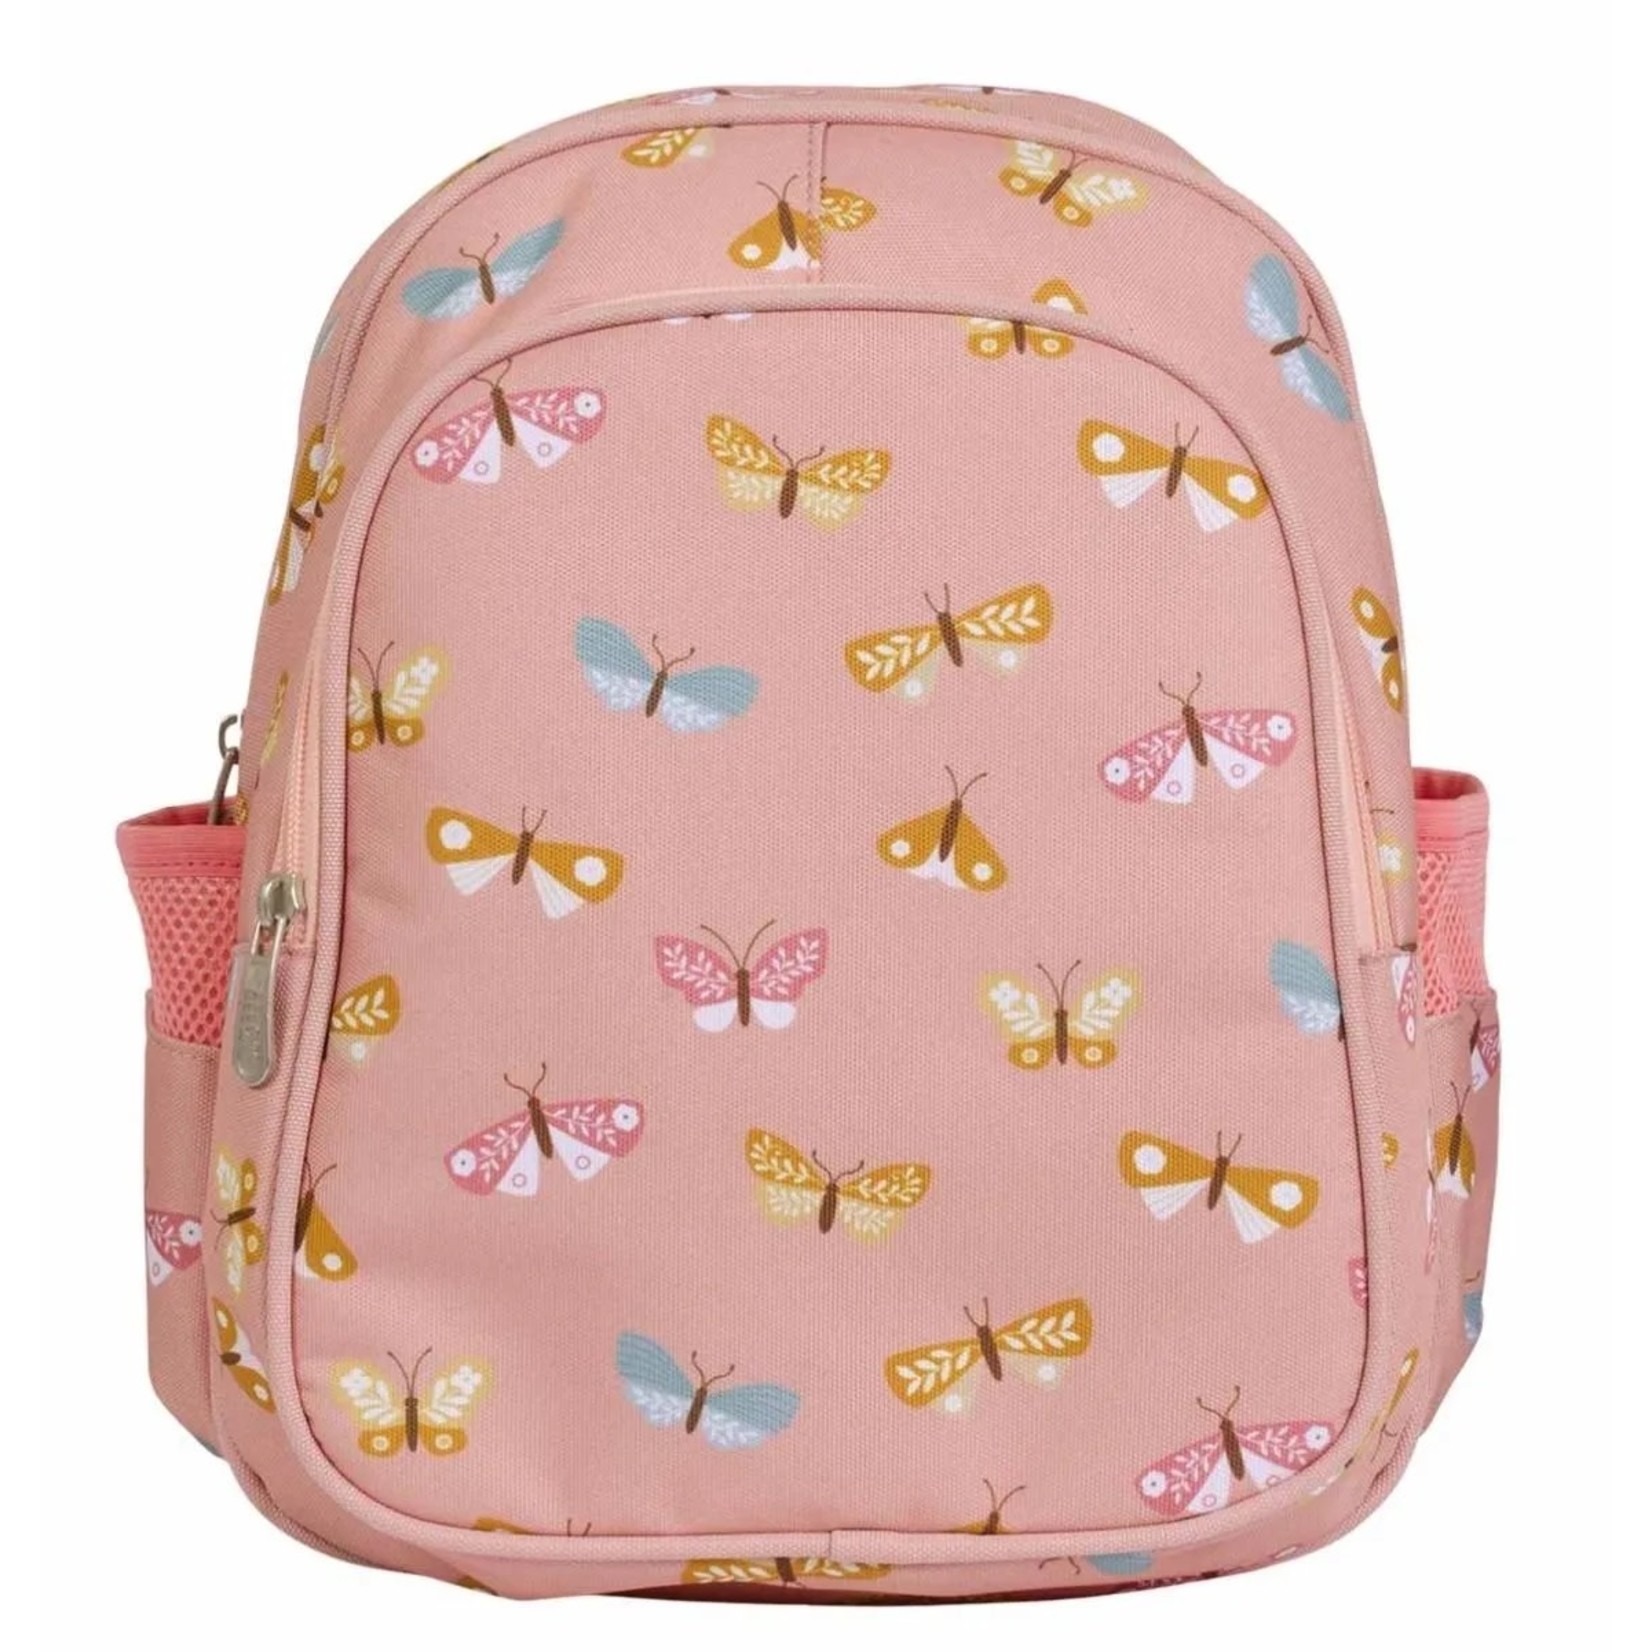 A LITTLE LOVELY COMPANY KIDS BACKPACK INSULATED FRONT COMPARTMENT: BUTTERFLIES